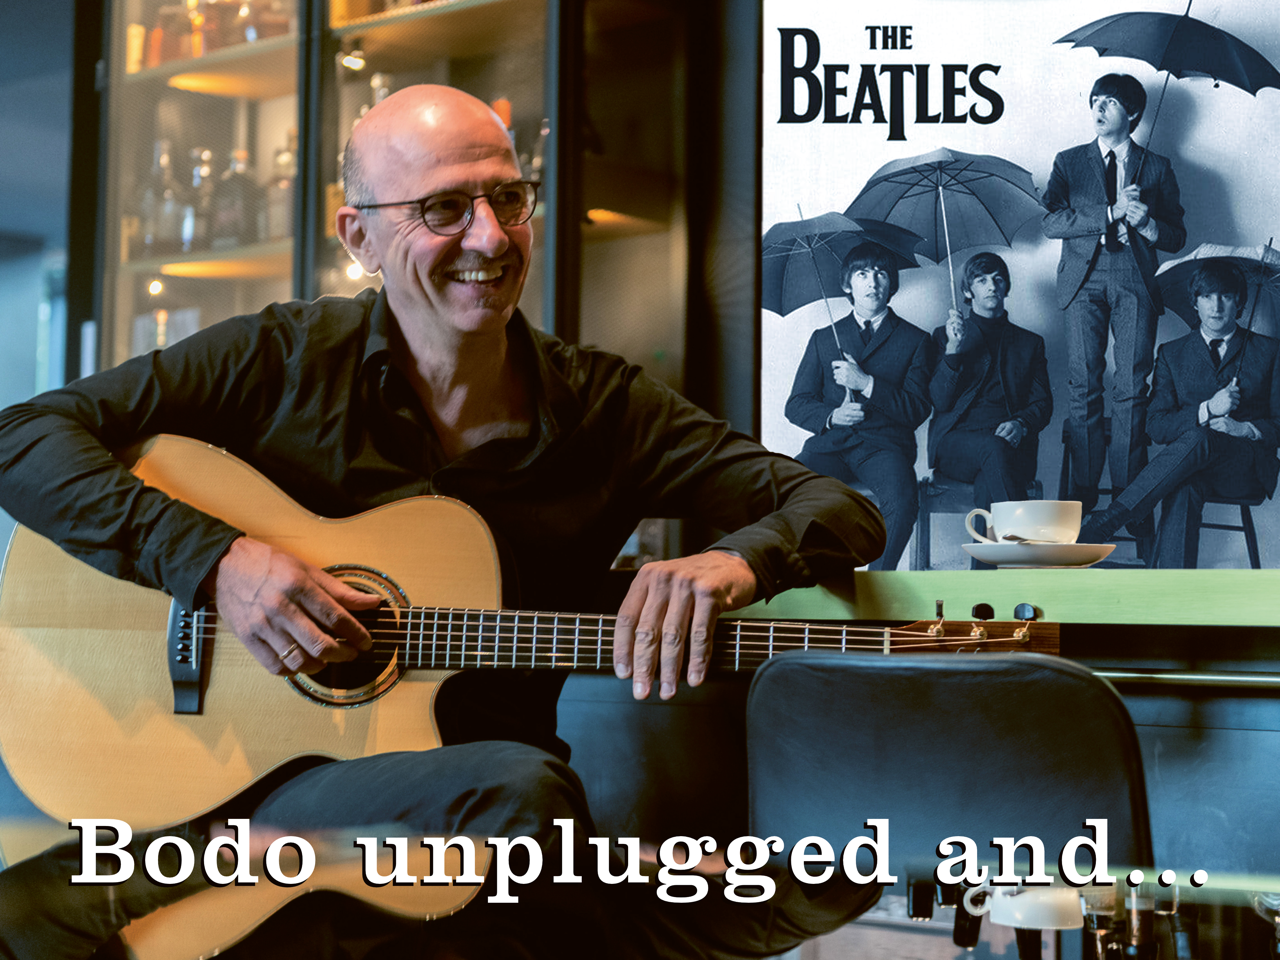 Bodo unplugged … and The Beatles